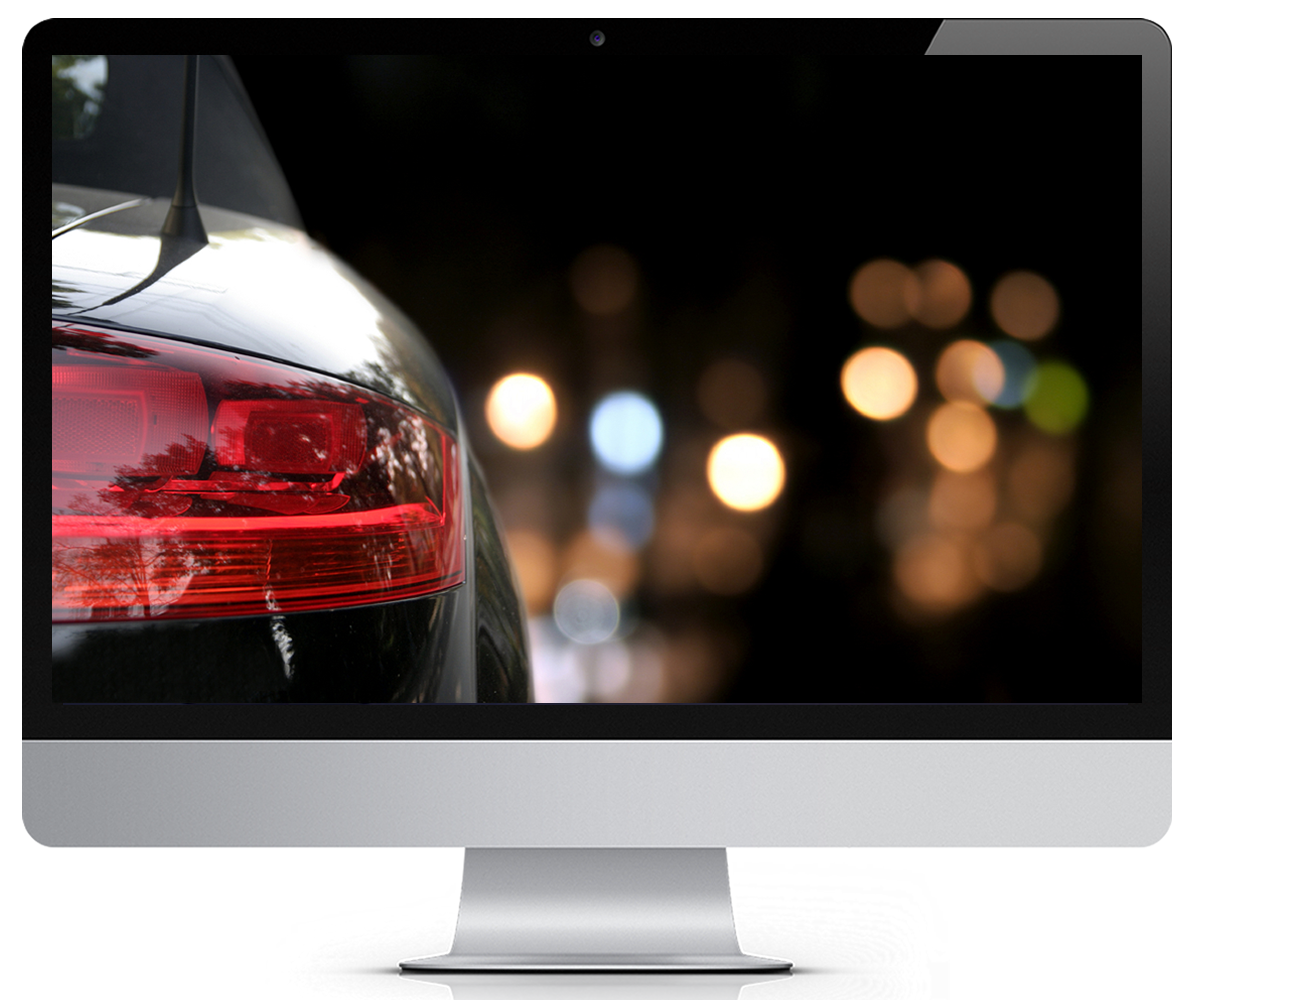 A computer monitor with a the tail light of a car on a city night



































































Computer Monitor white background - with a photo of a tail light on a city night super imposed on the monitor

